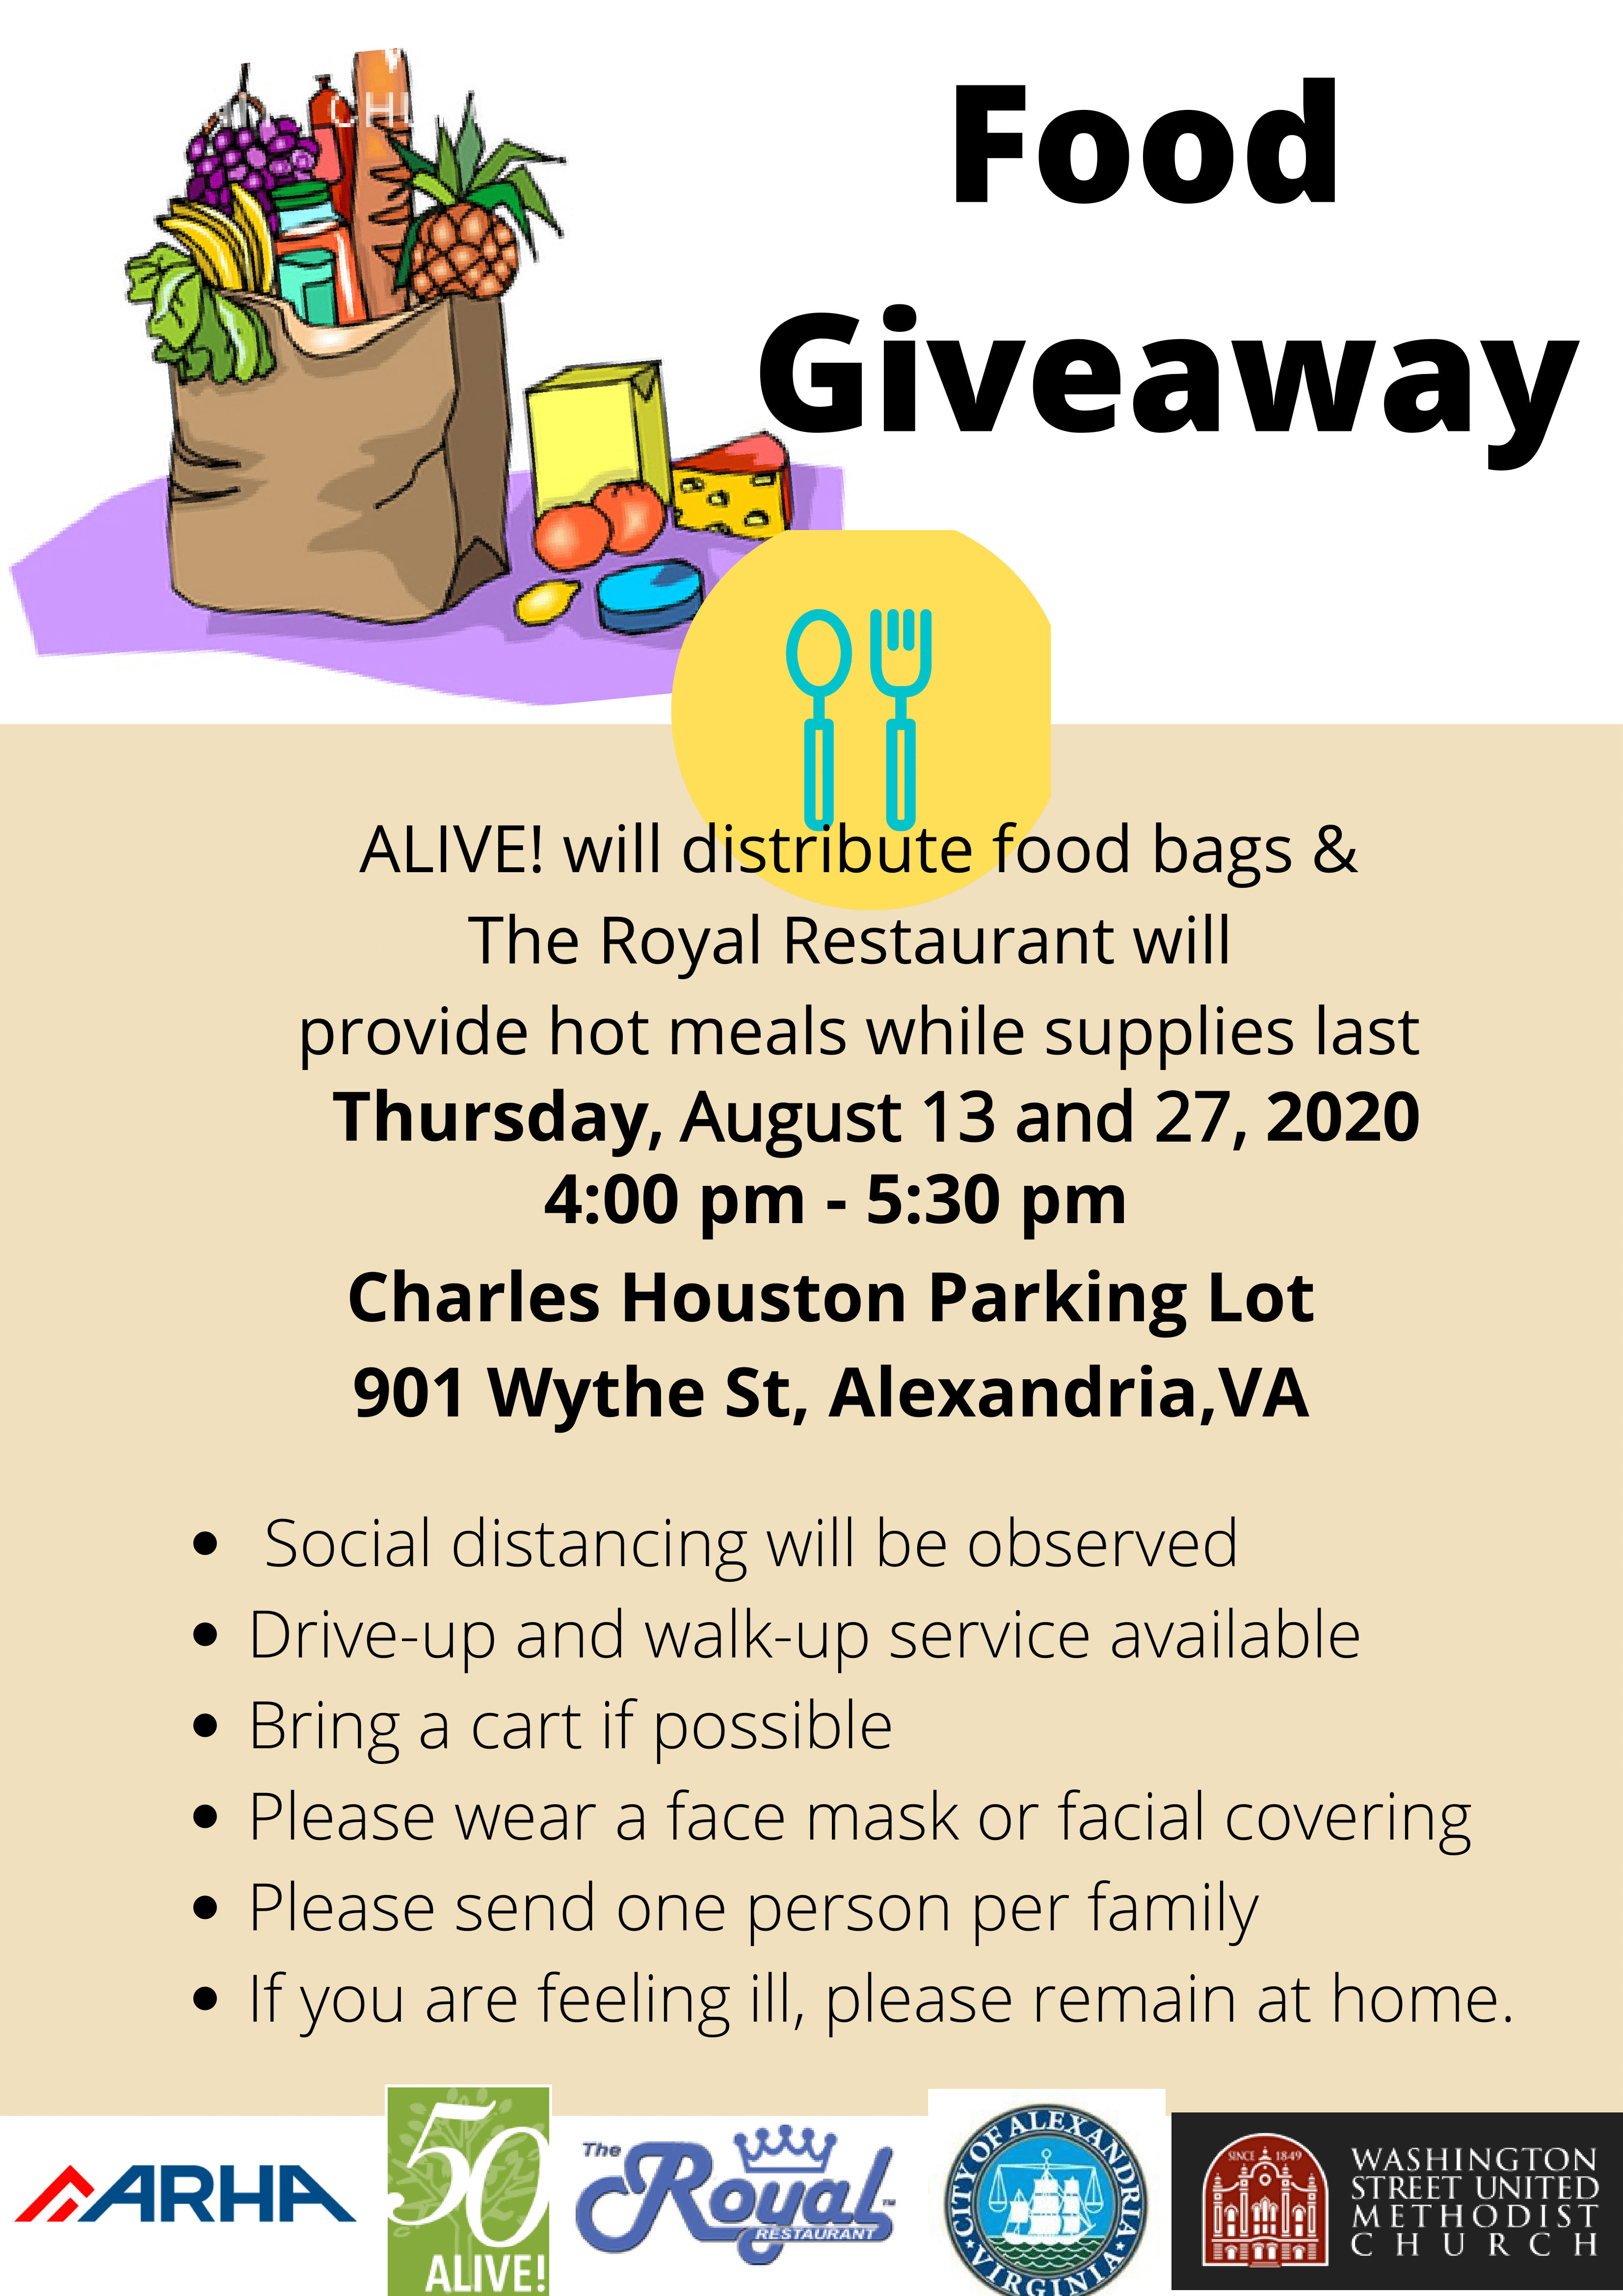 chfoodgiveaway